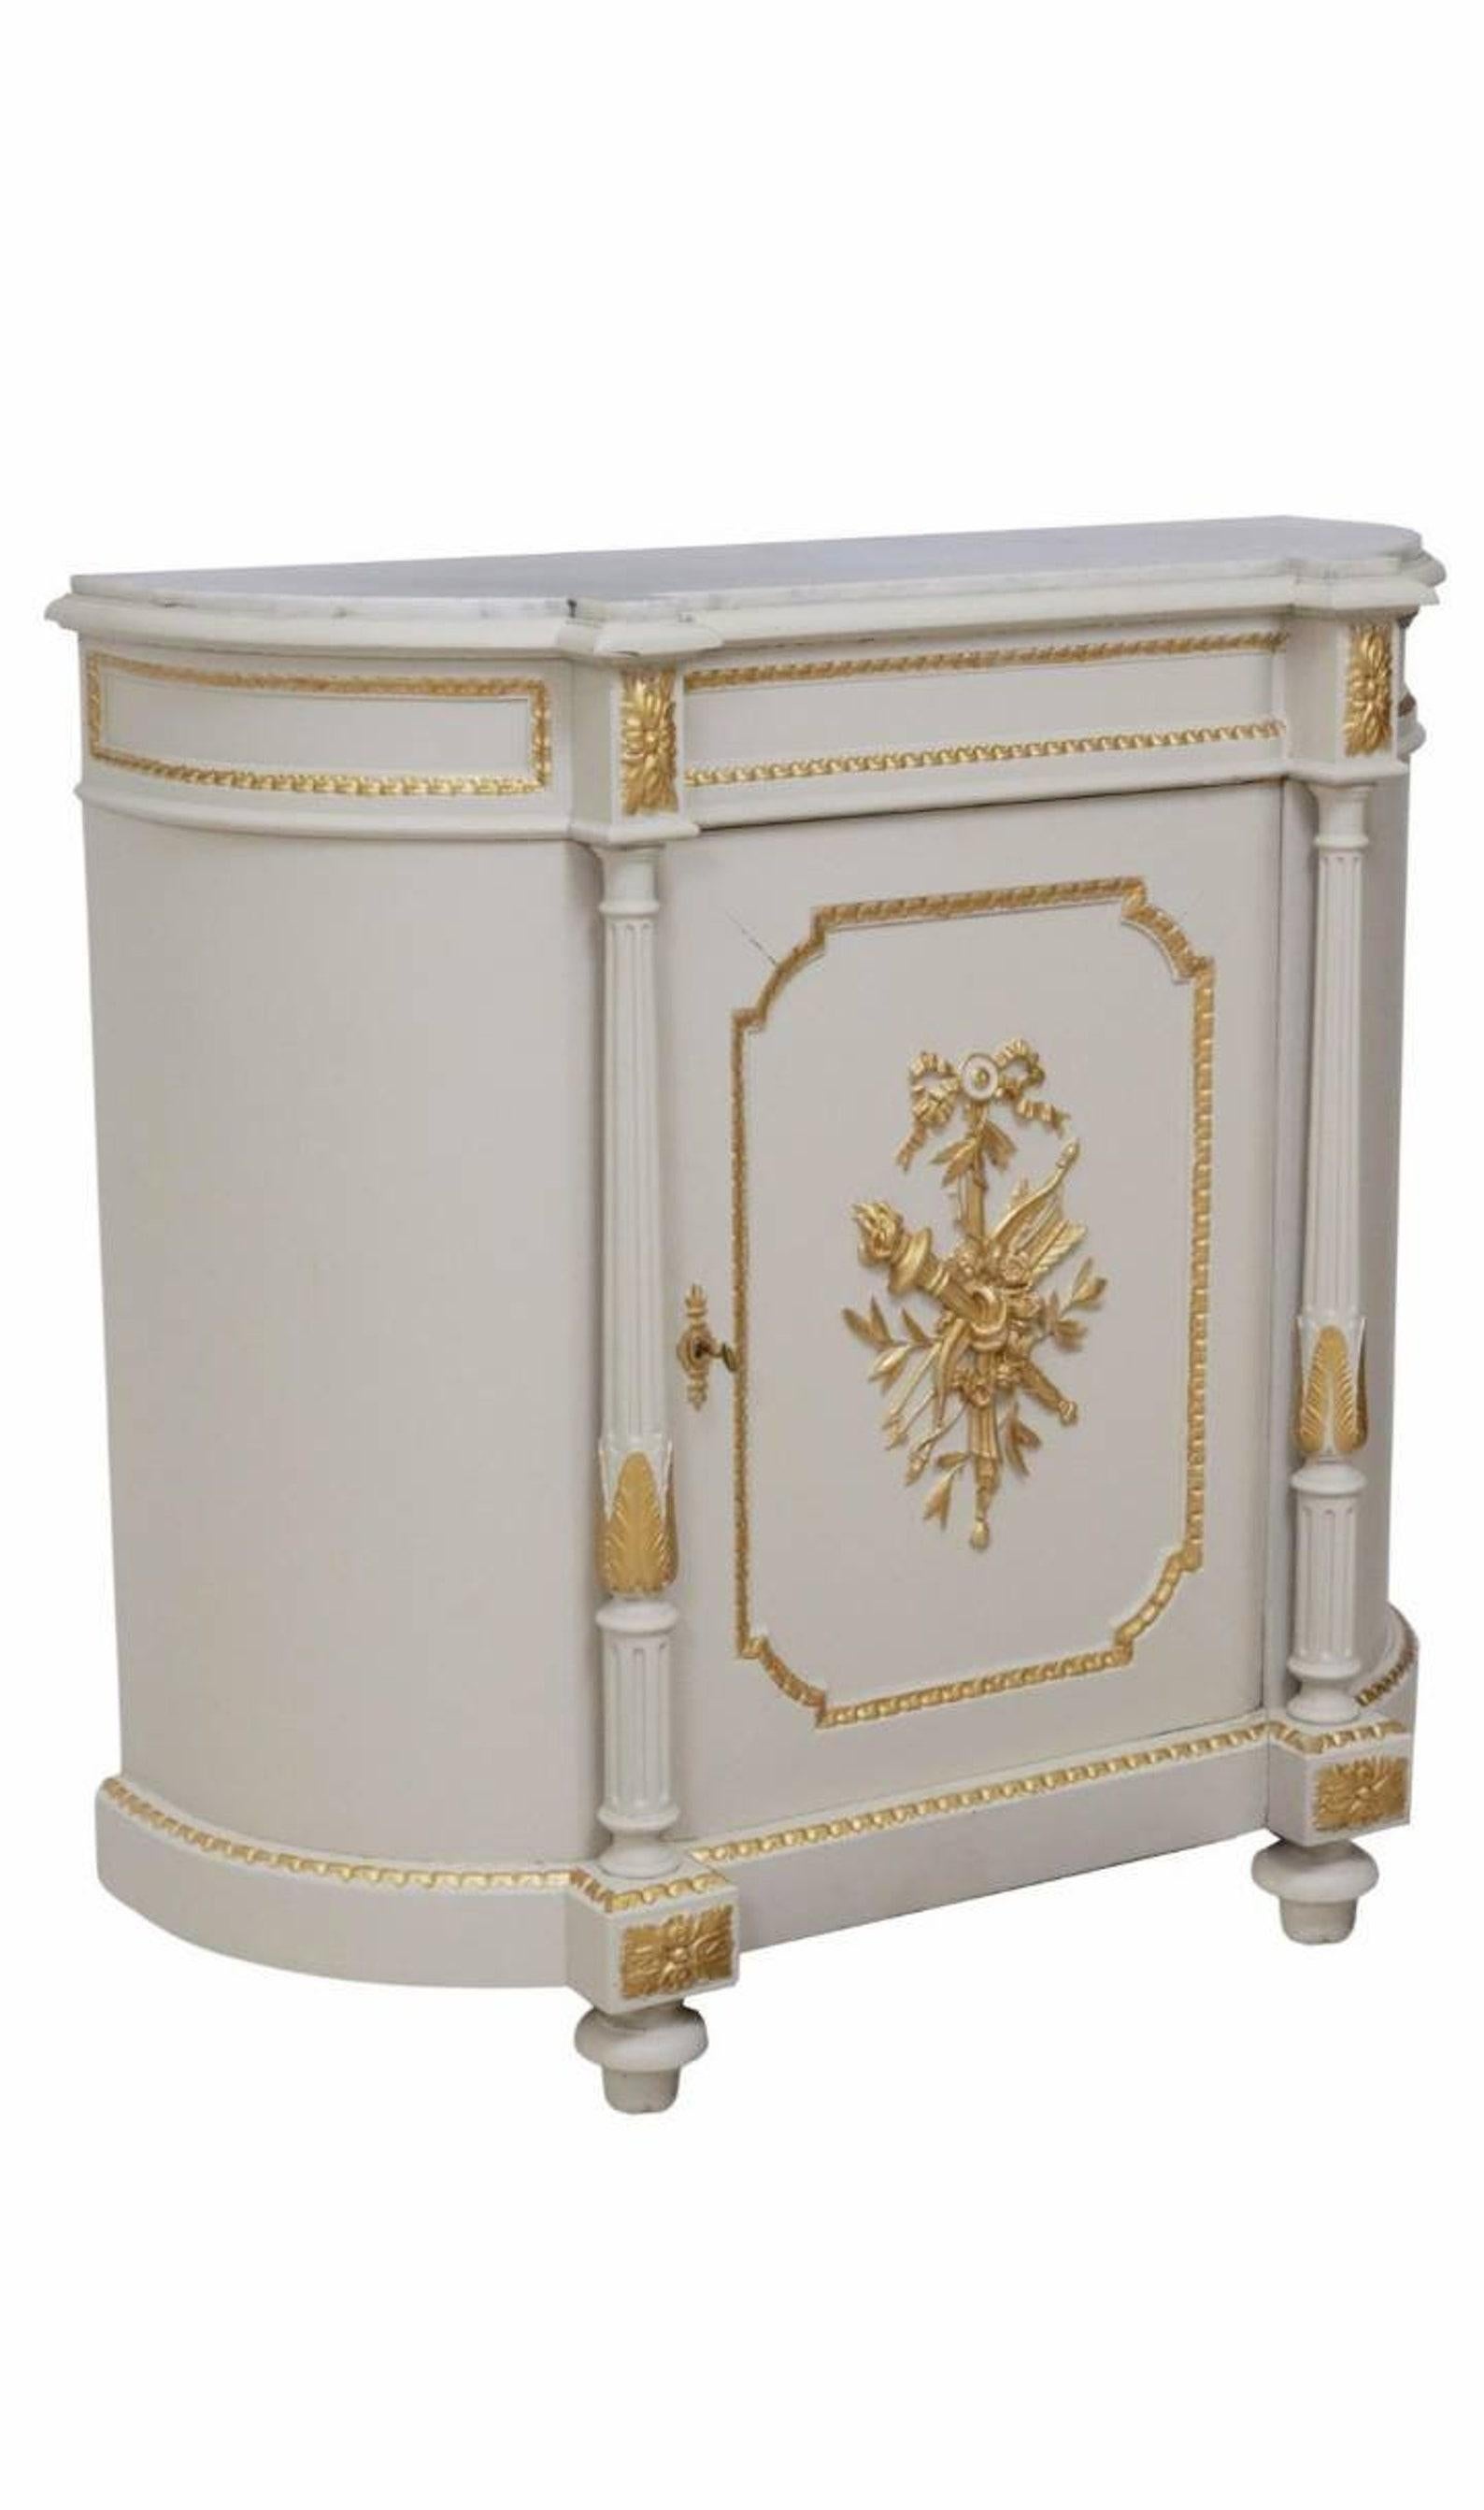 Add luxurious French elegance and Parisian sophistication with this antique Louis XVI style demilune sideboard server. circa 1920

Born in France in the early 20th century, finished in luxurious King Louis XVI taste, in the manner of Maison Jansen